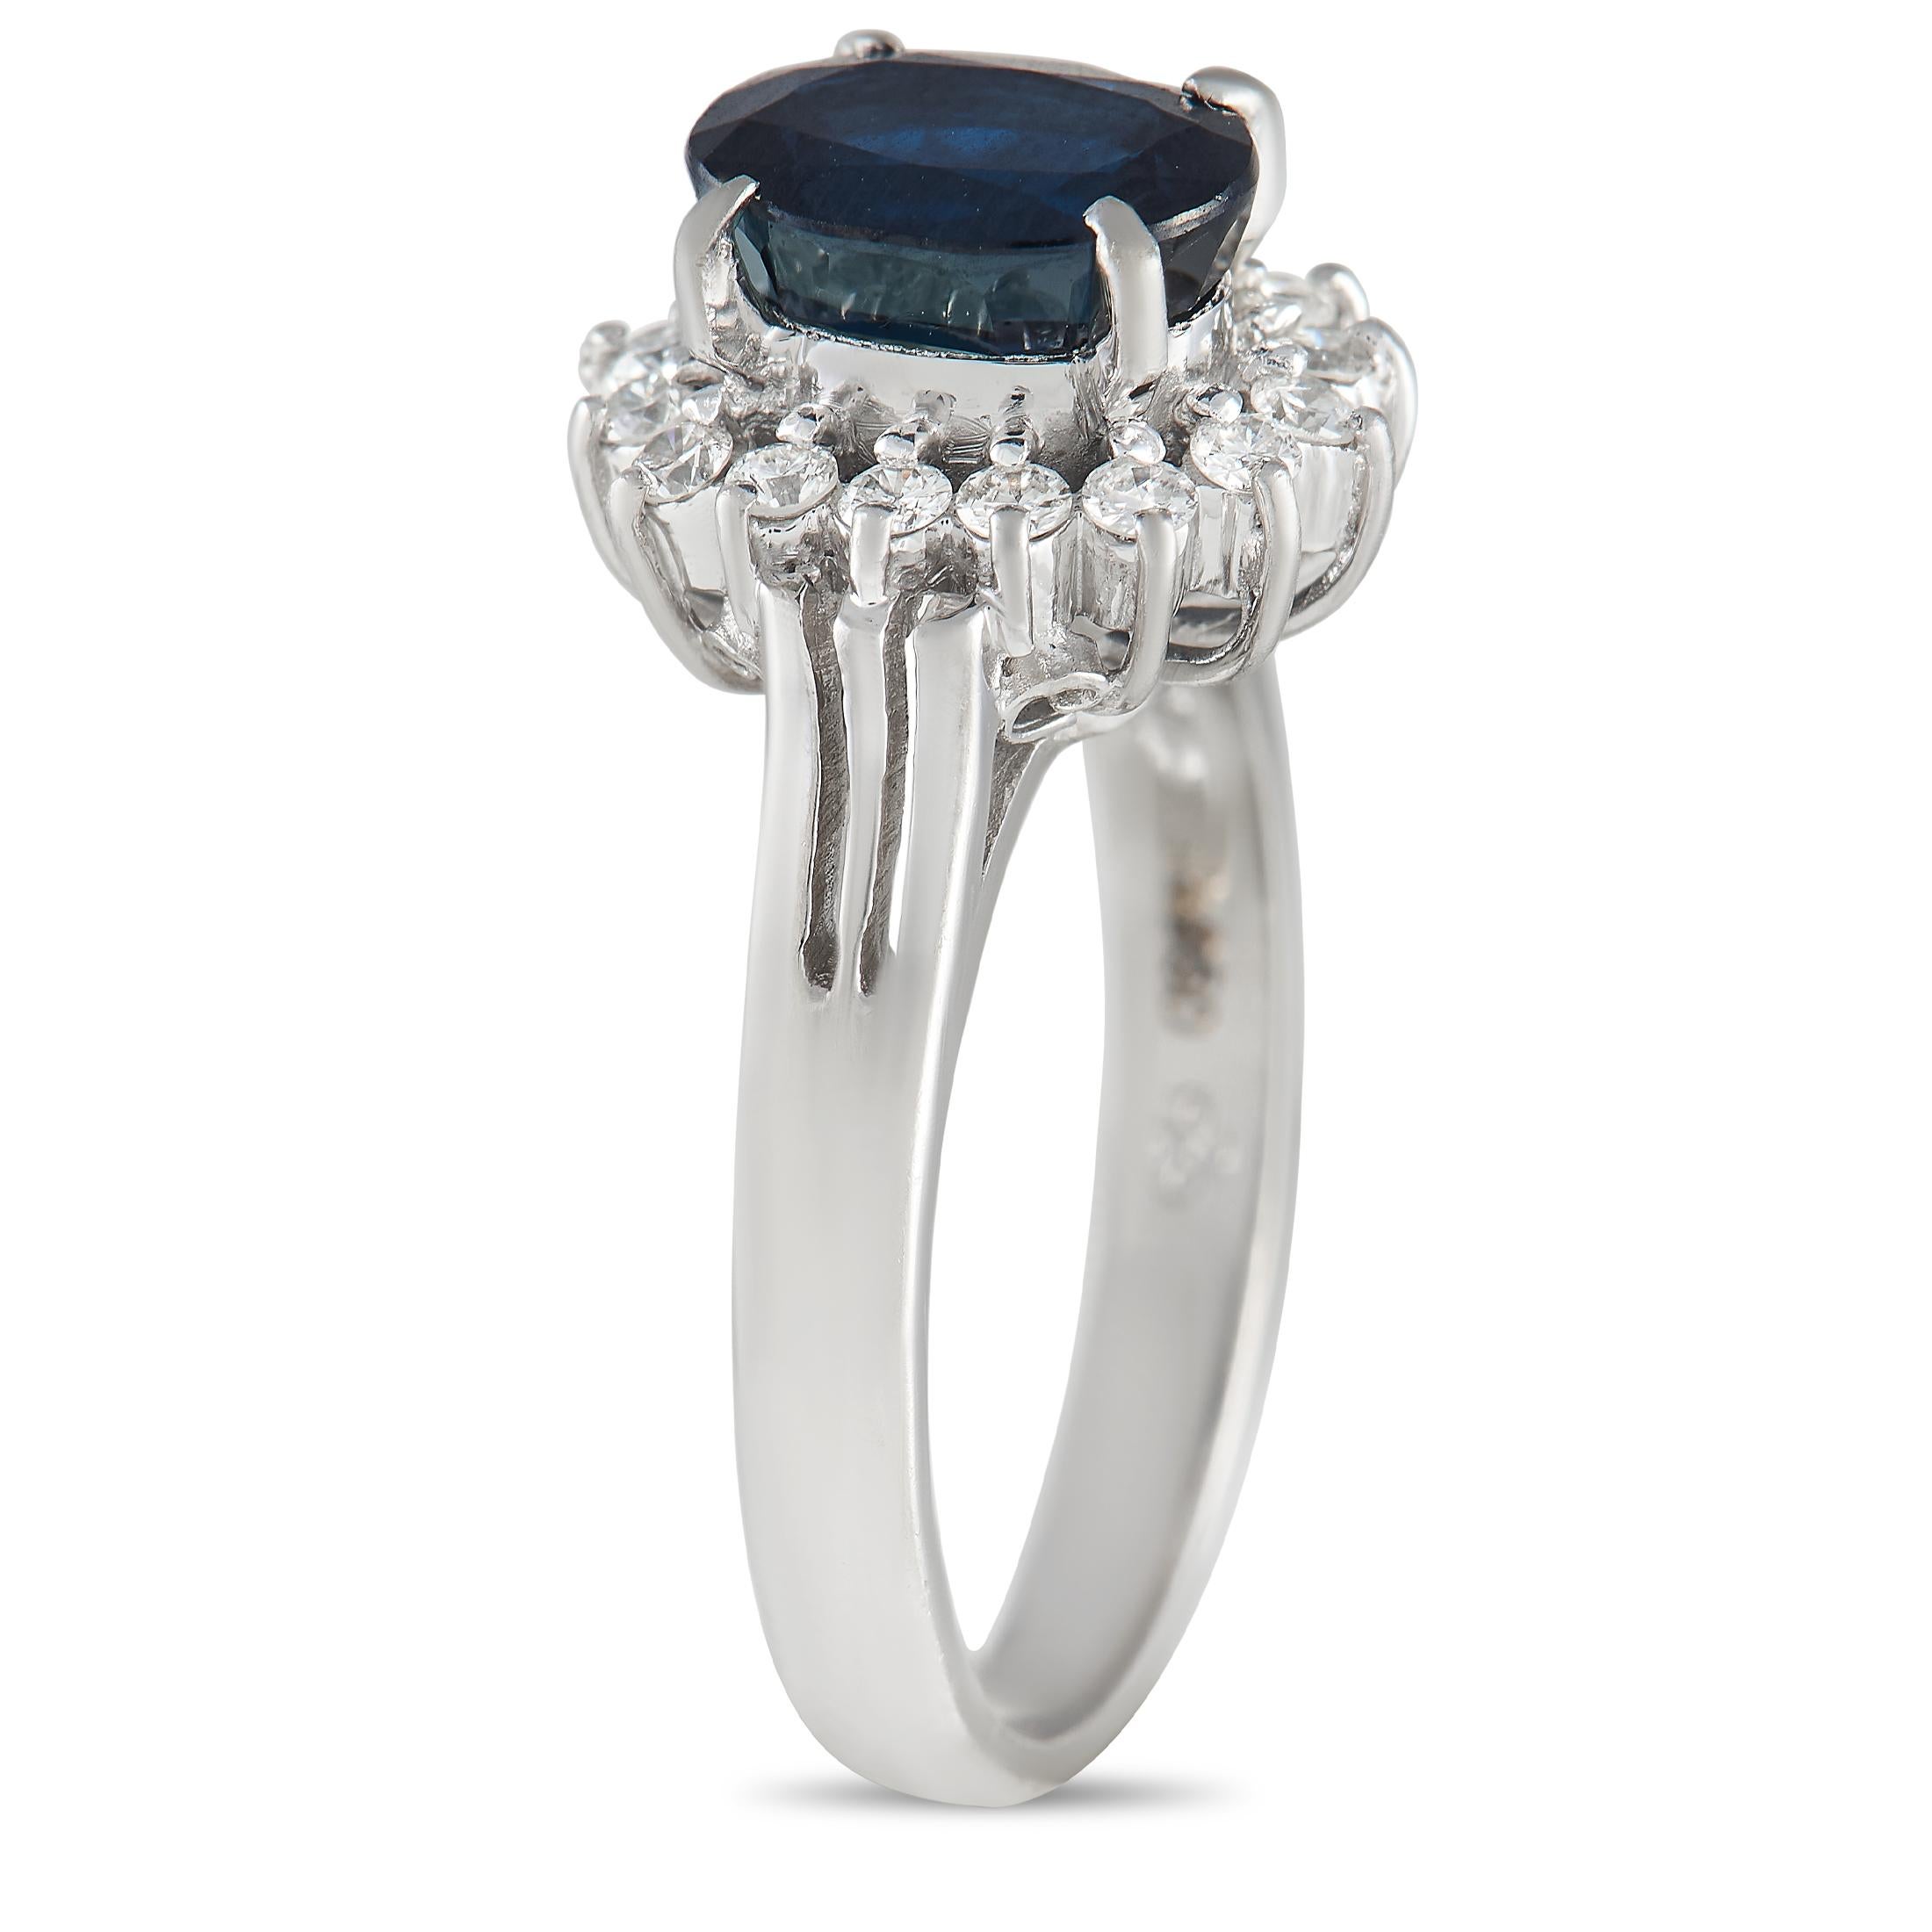 Looking for something other than a classic diamond ring? Dare to stand out with this sapphire and diamond ring. Exuding regal elegance, this platinum band comes topped with a midnight blue sapphire standing tall from an oval frame of round white